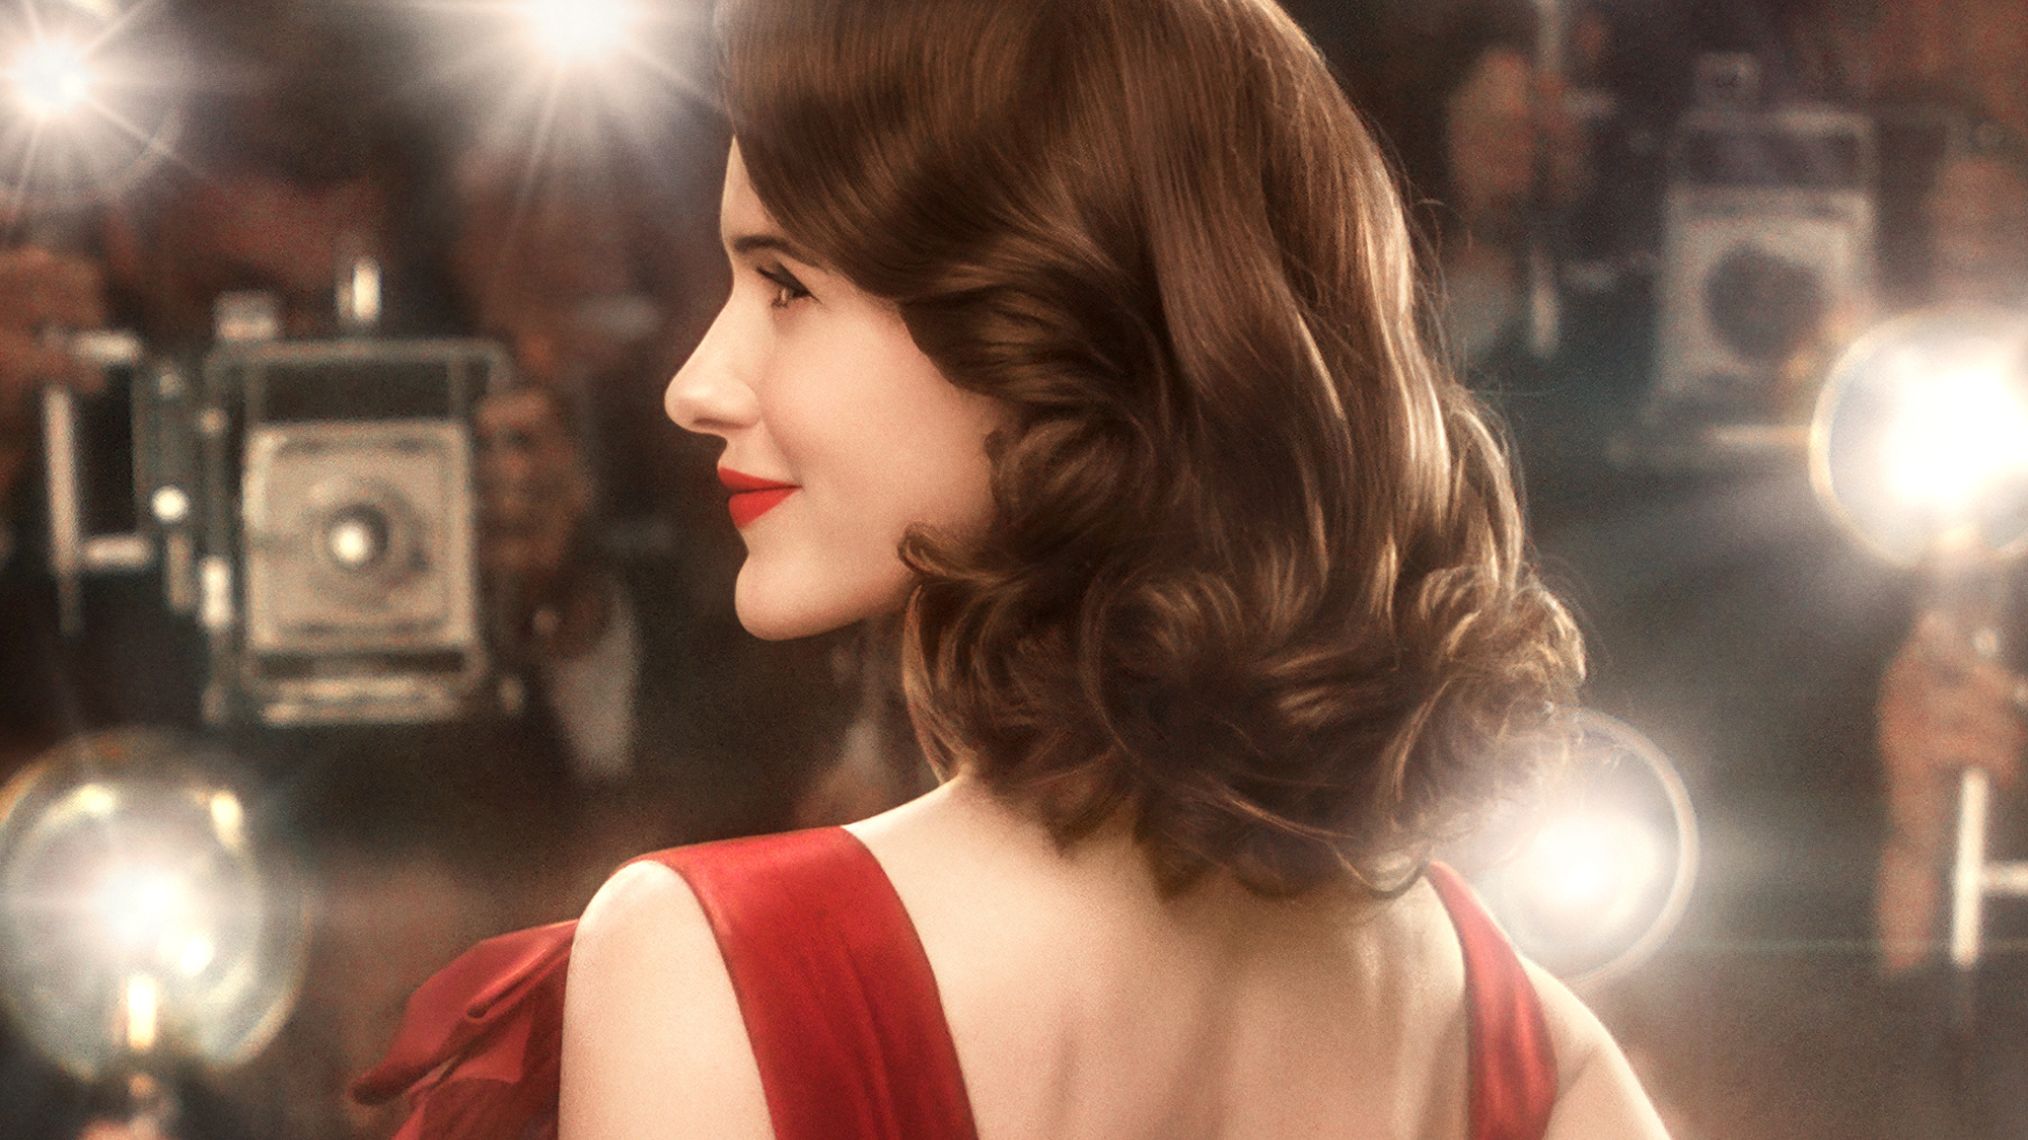 The Marvelous Mrs. Maisel Season 5 Release Date Set For Prime Video With Bumper Premiere